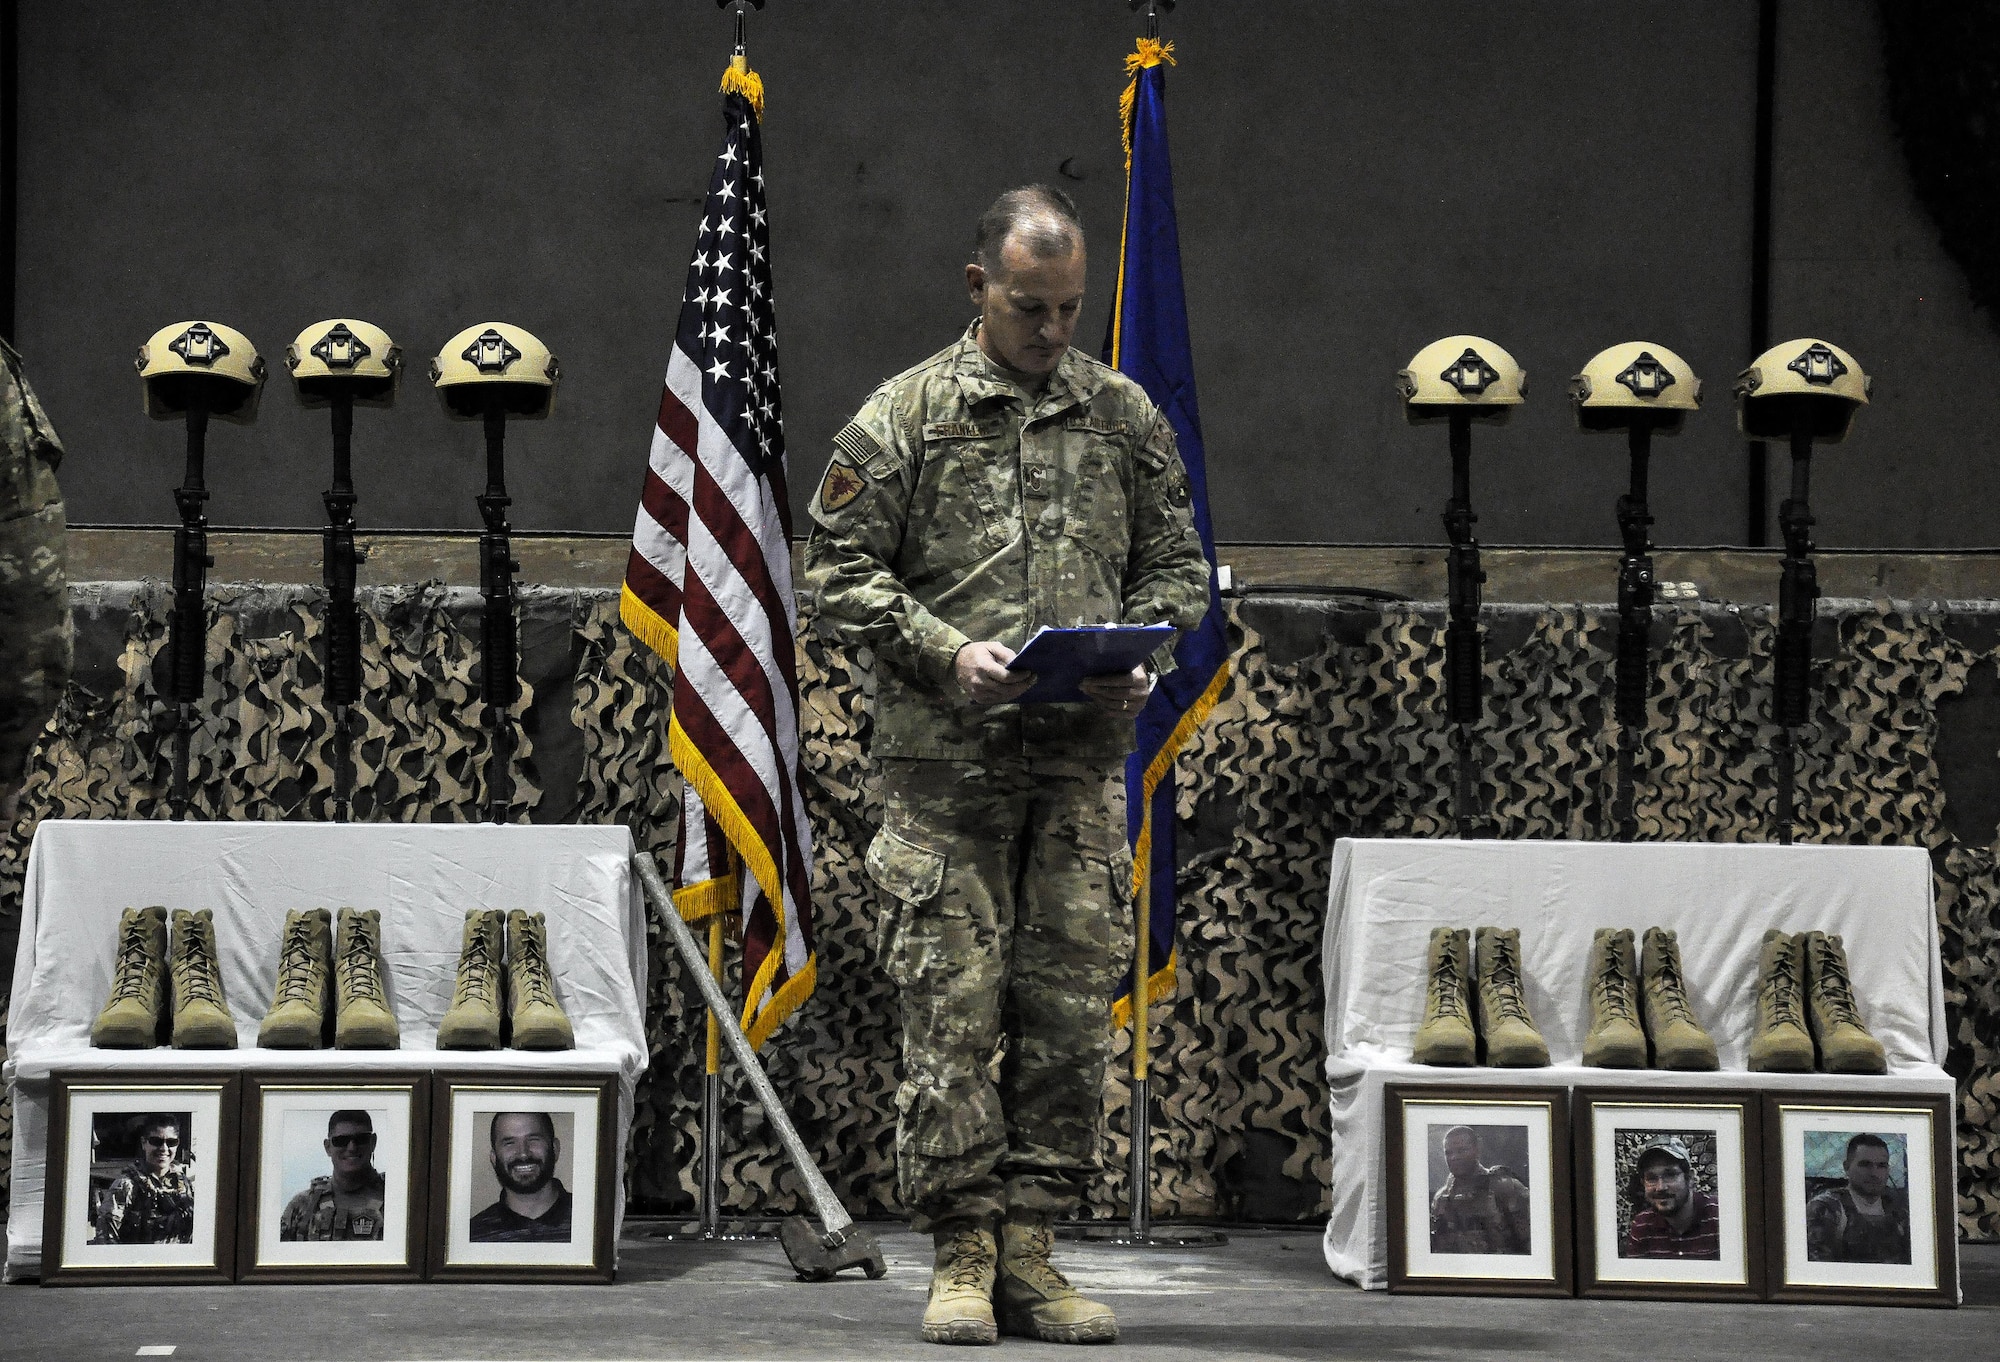 Service members from several units at Bagram Airfield, Afghanistan pay their respects during a fallen comrade ceremony held in honor of six Airmen Dec. 23, 2015.  The six Airmen lost their lives in an improvised explosive attack near Bagram Dec. 21, 2015. (U.S. Air Force photo by Tech. Sgt. Nicholas Rau)